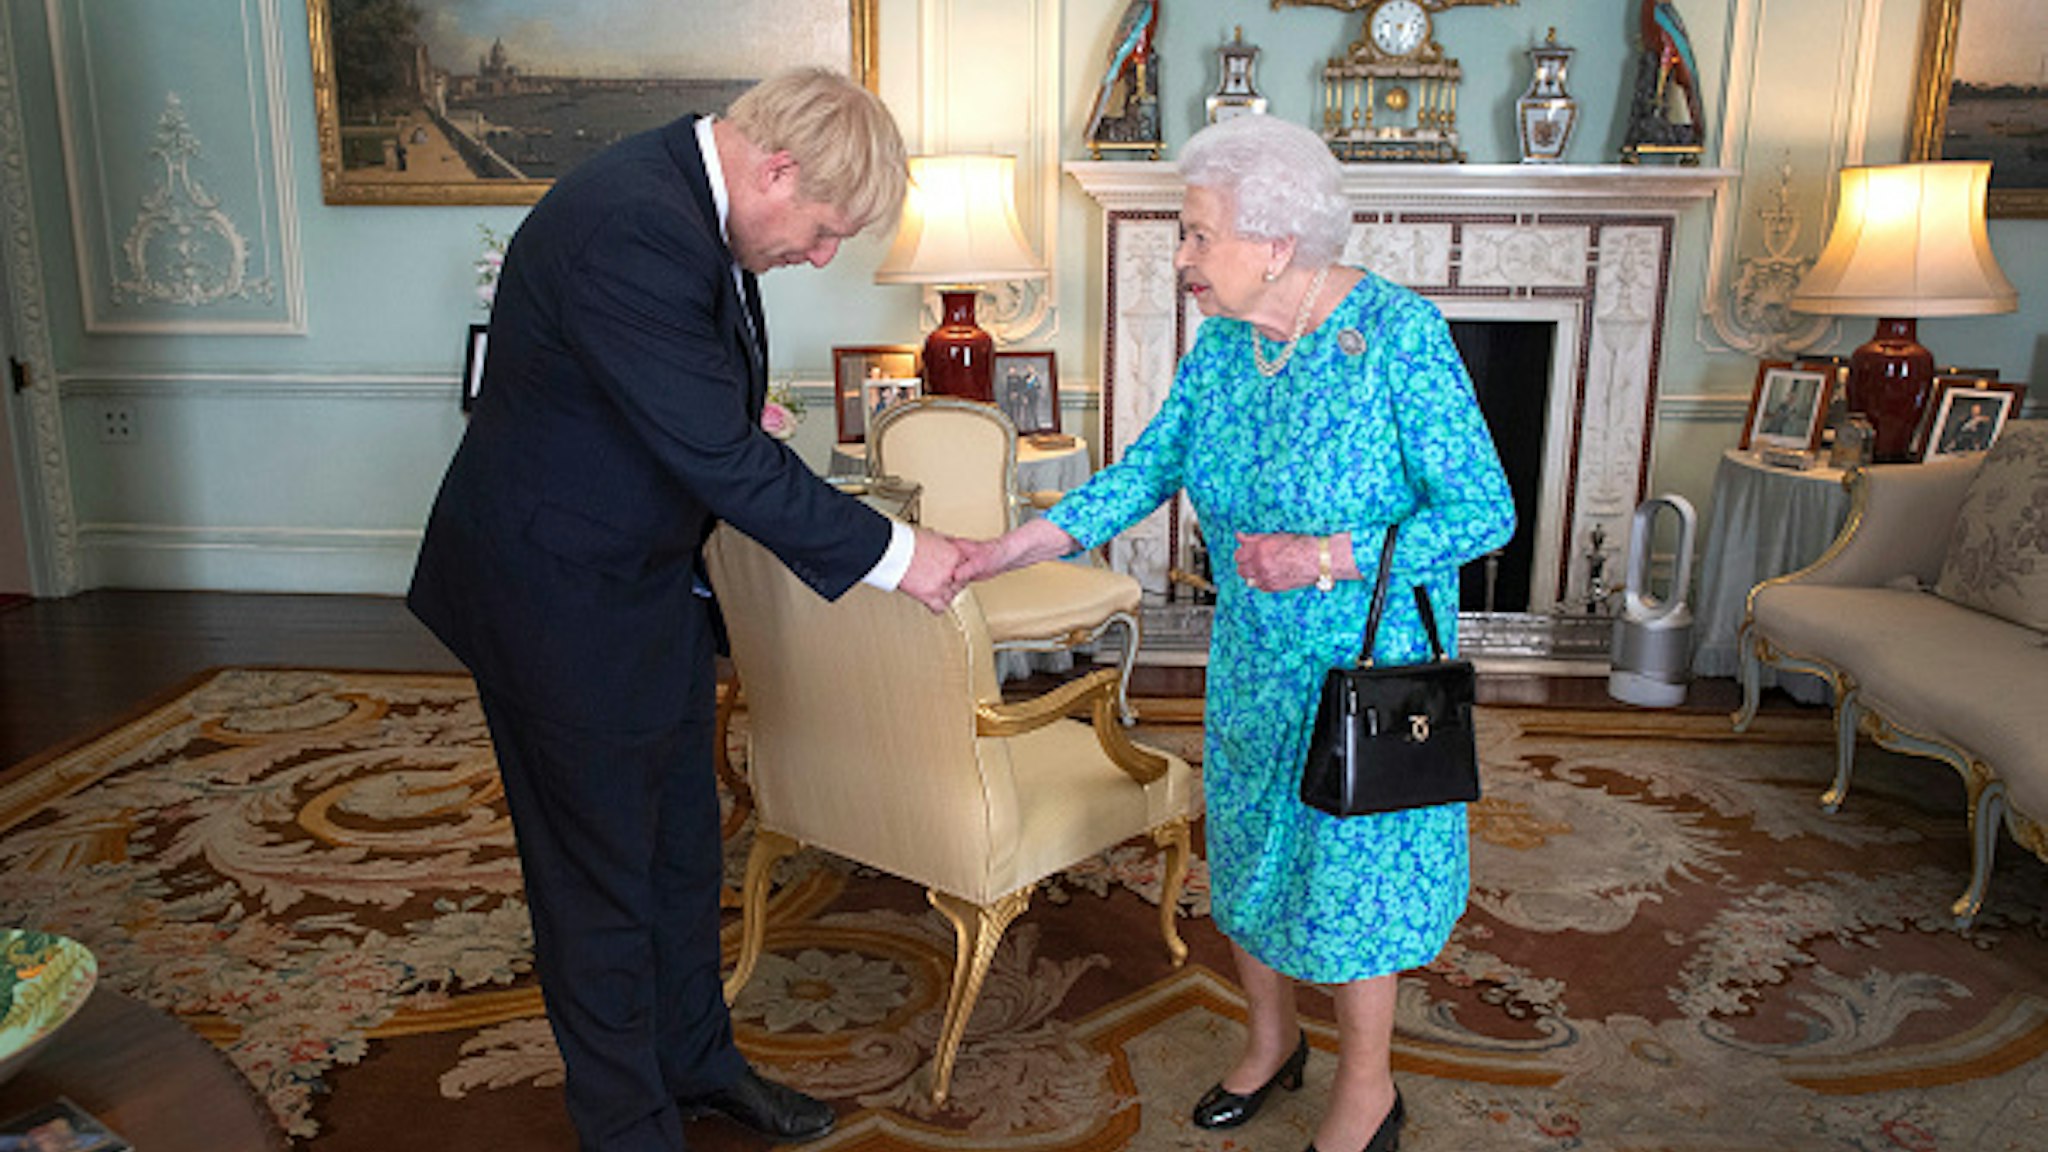 Queen Elizabeth II welcomes newly elected leader of the Conservative party, Boris Johnson during an audience where she invited him to become Prime Minister and form a new government in Buckingham Palace on July 24, 2019 in London, England.